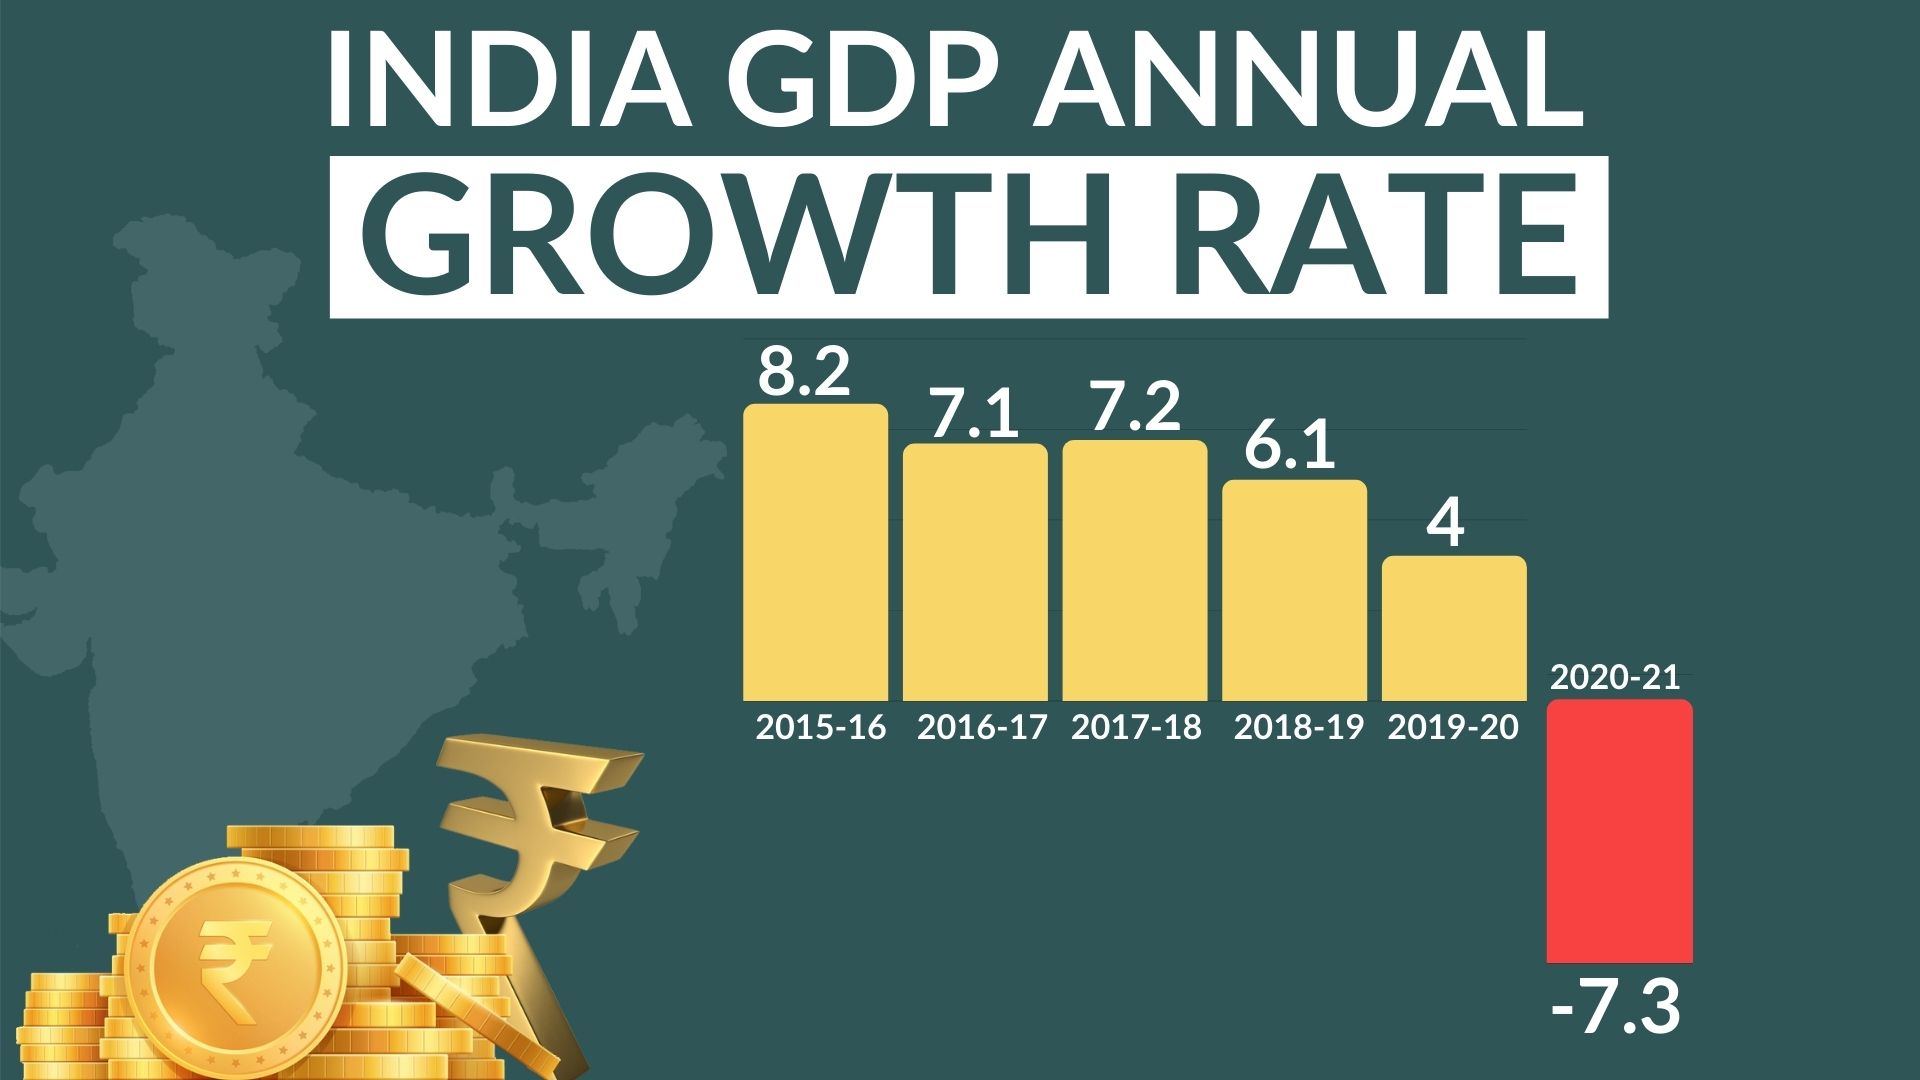 gdp growth rate, india gdp